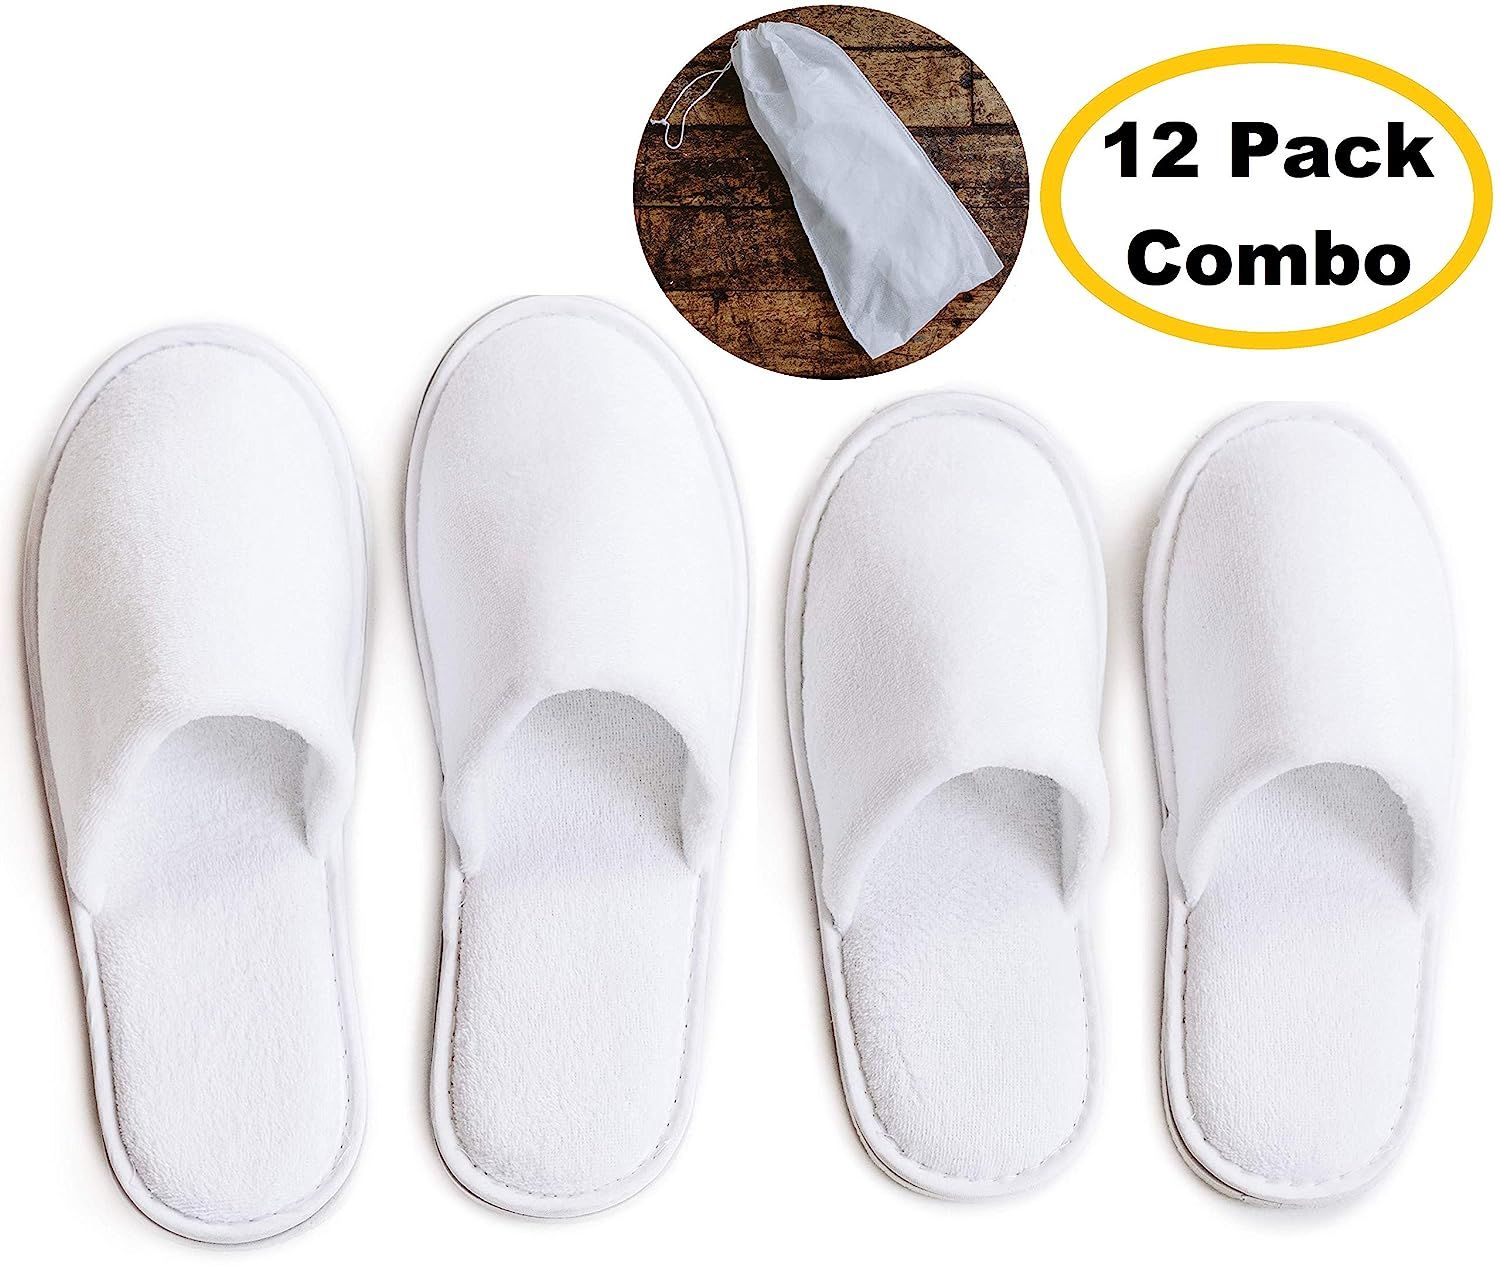 MODLUX Spa Slippers - 12 Pairs of Closed Toe Cotton Velvet Hotel/Spa Slippers with Drawstring Bag... | Amazon (US)